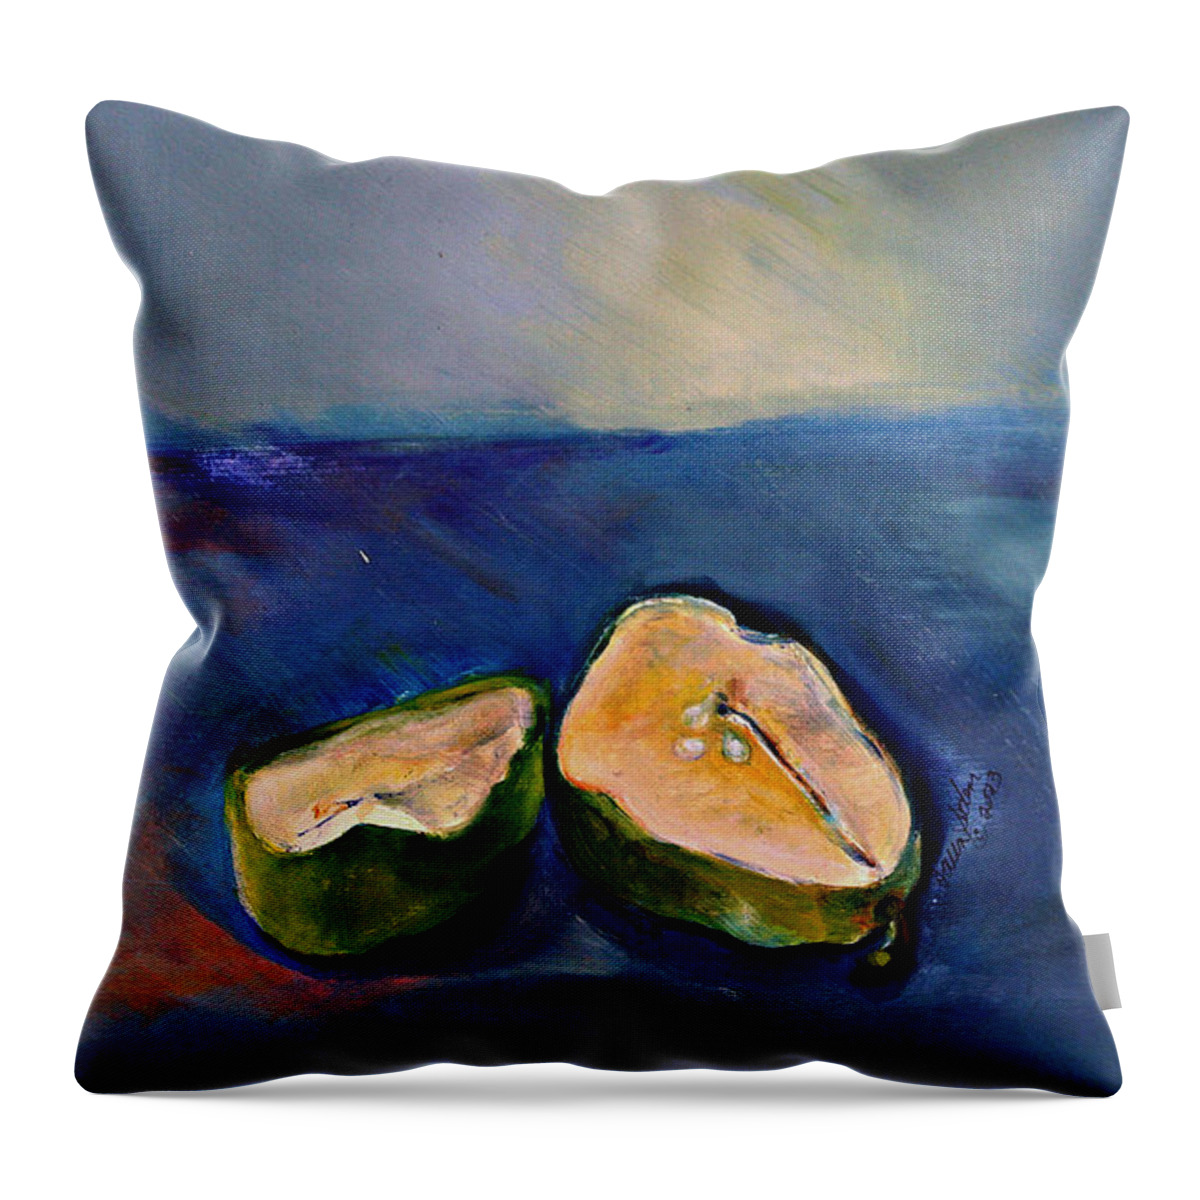 Oil Painting Throw Pillow featuring the painting Pear Split by Daun Soden-Greene